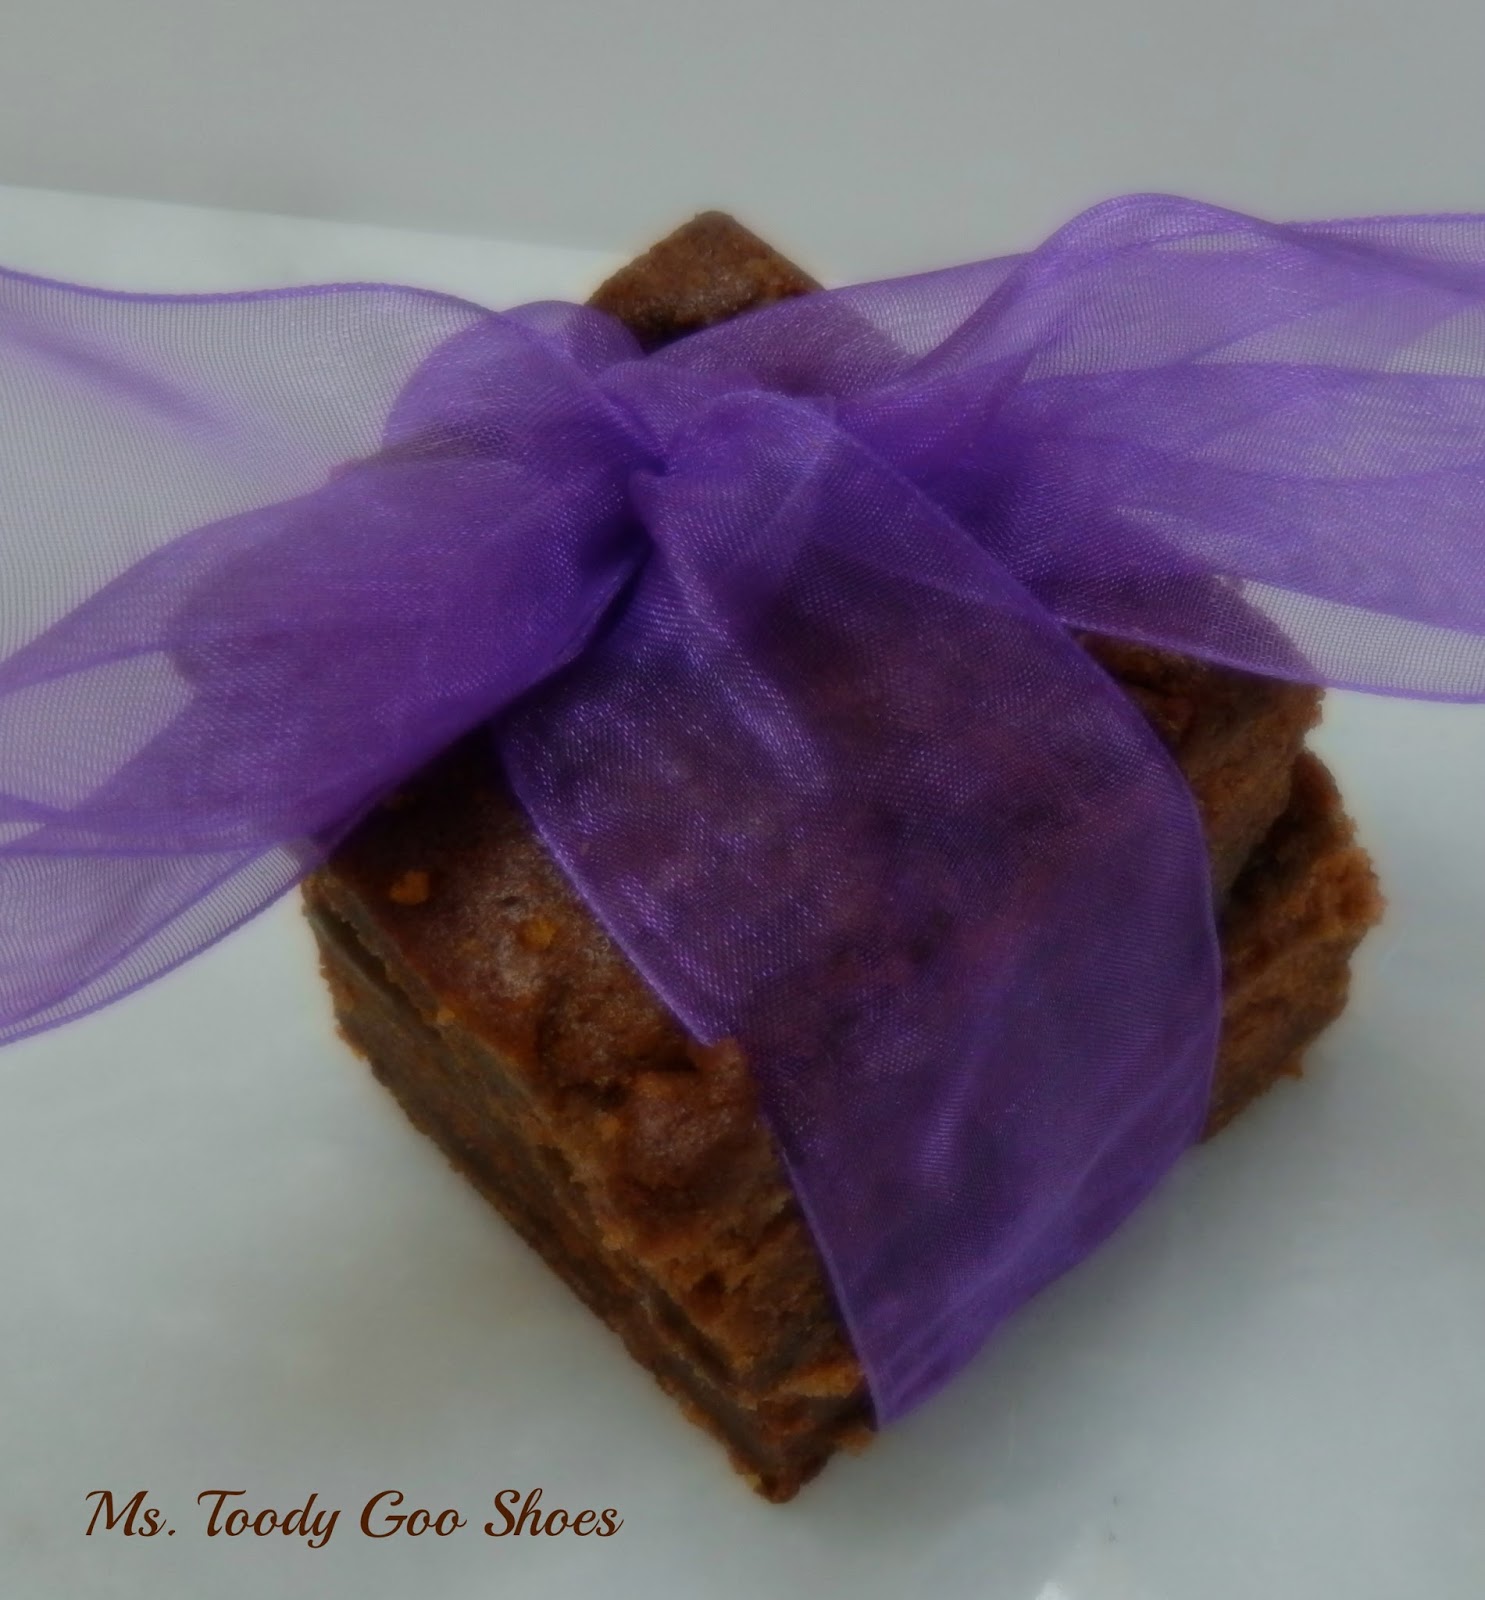 "Plain Jane" German Chocolate Cake -- It's Simply Delicious! By Ms. Toody Goo Shoes